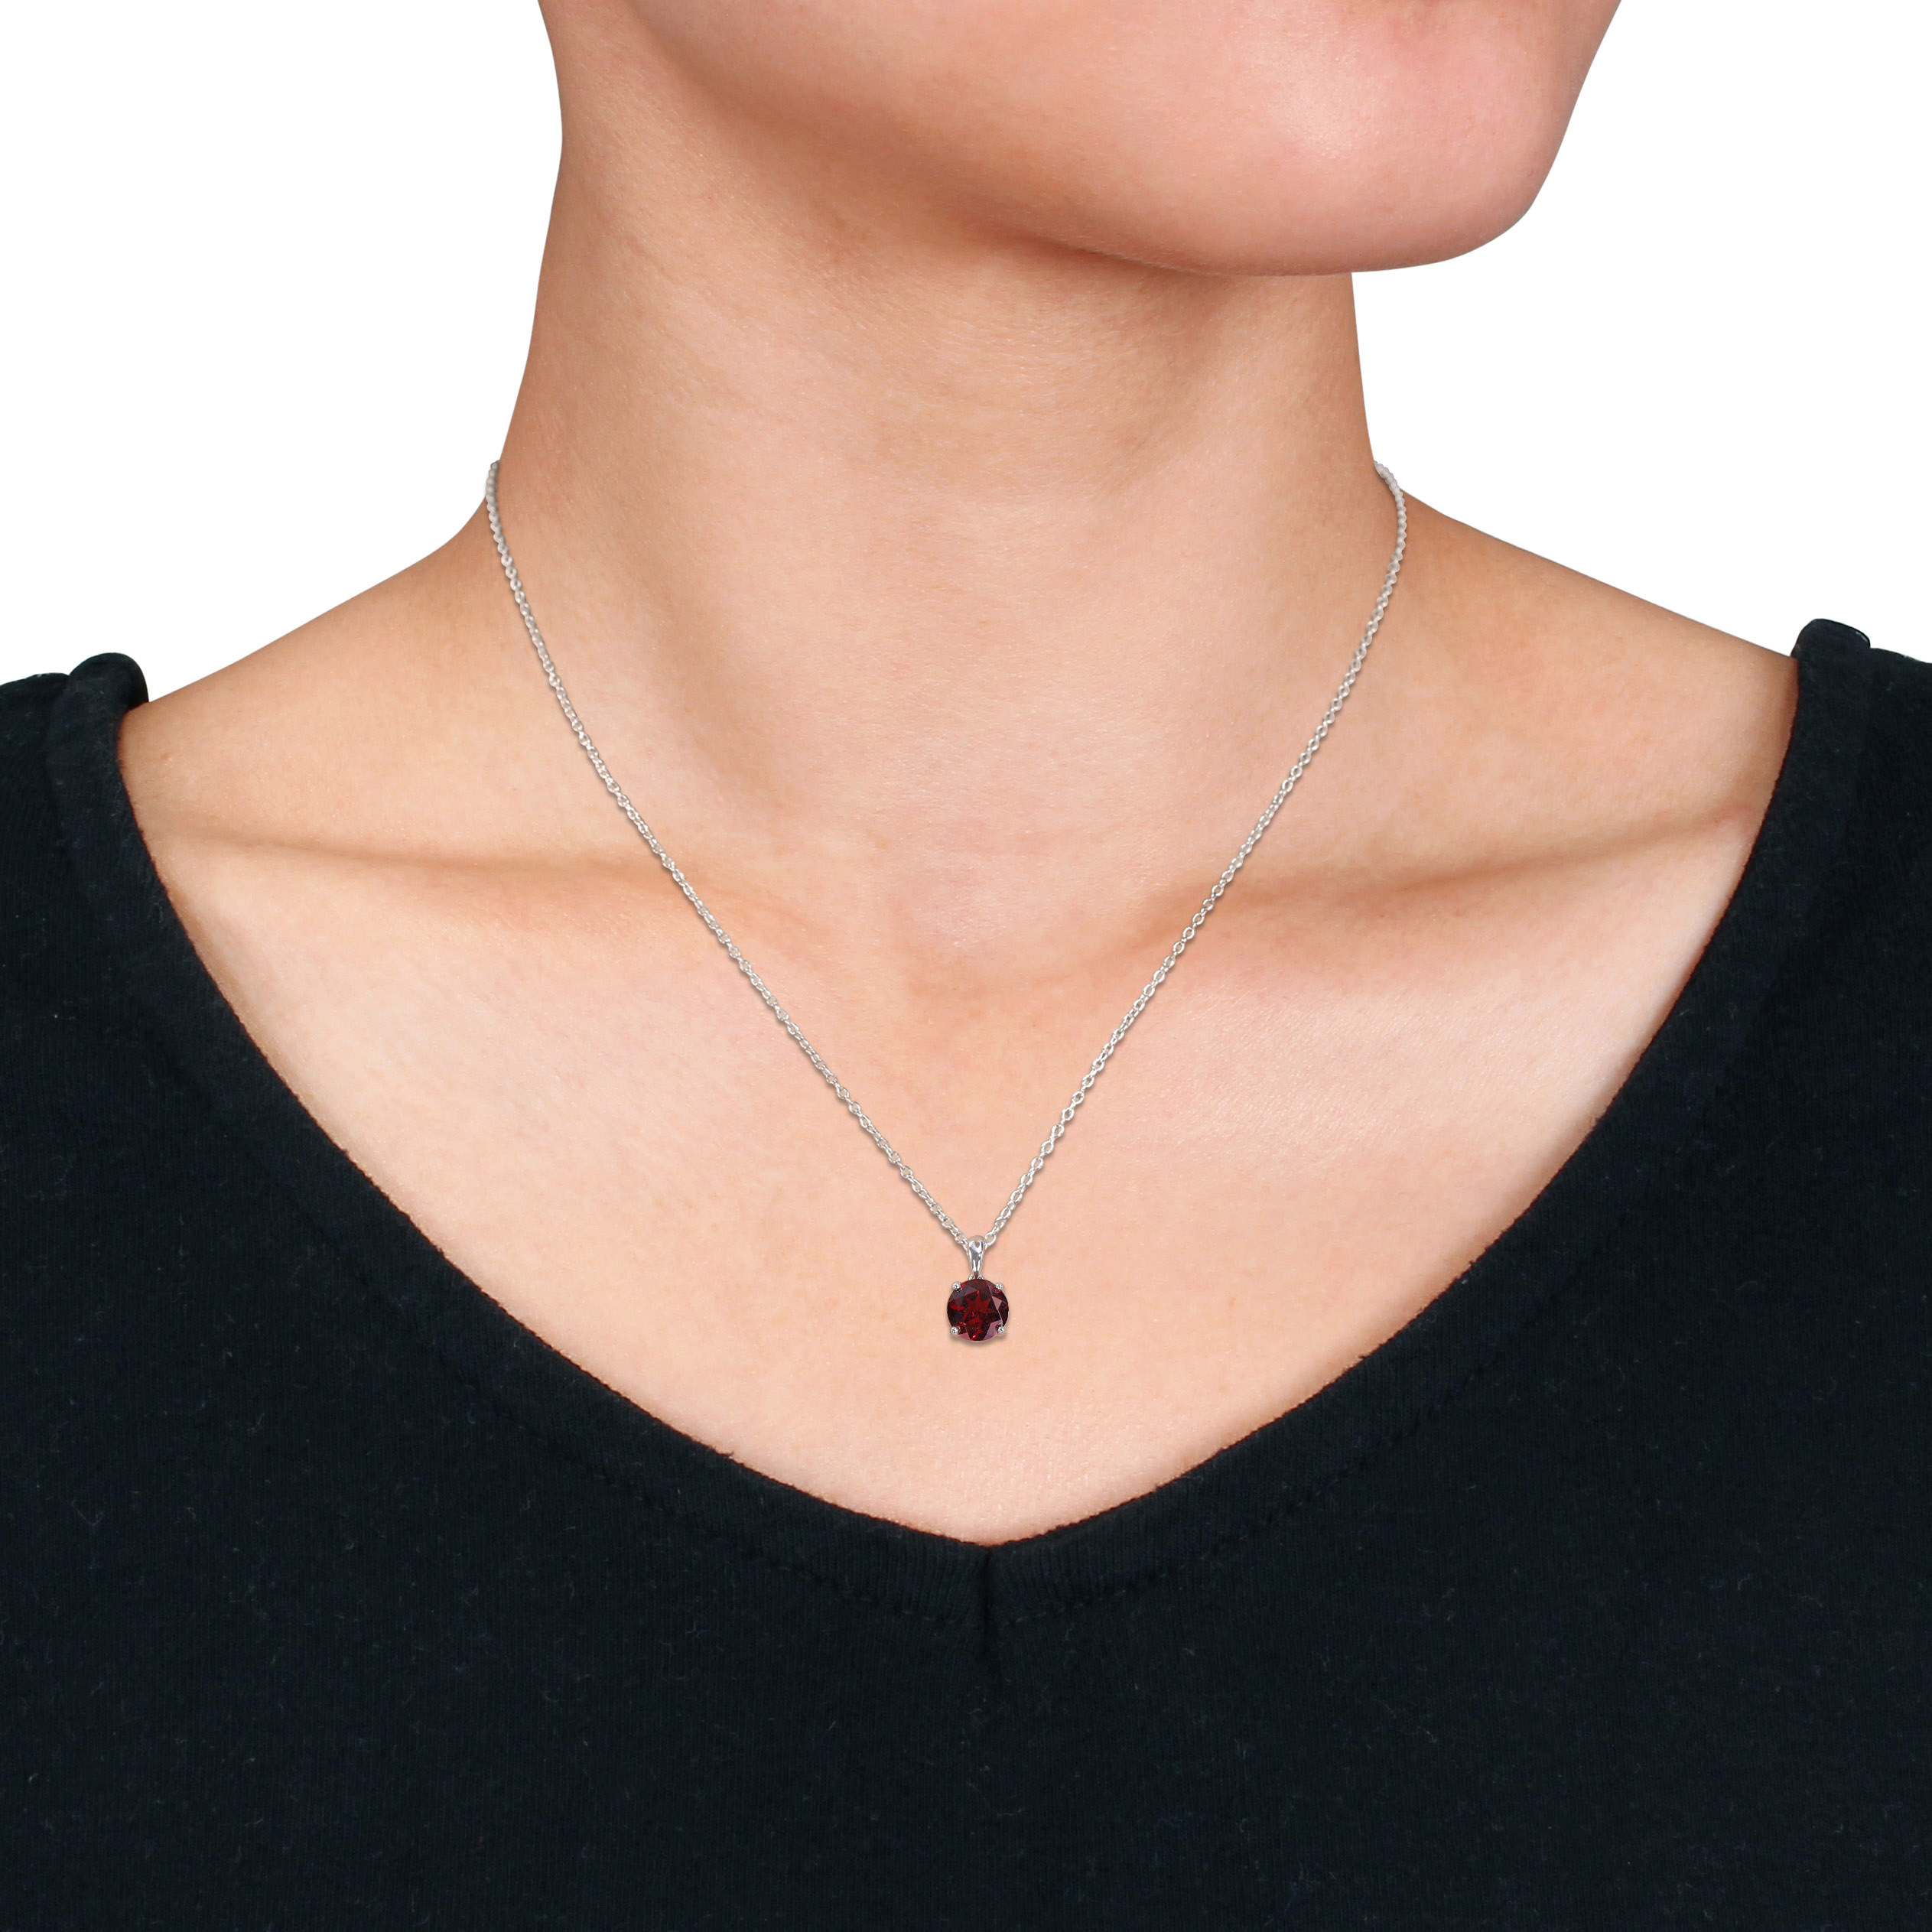 2 CT TGW Garnet Solitaire Heart Design Pendant with Chain in Sterling Silver - 18 in.